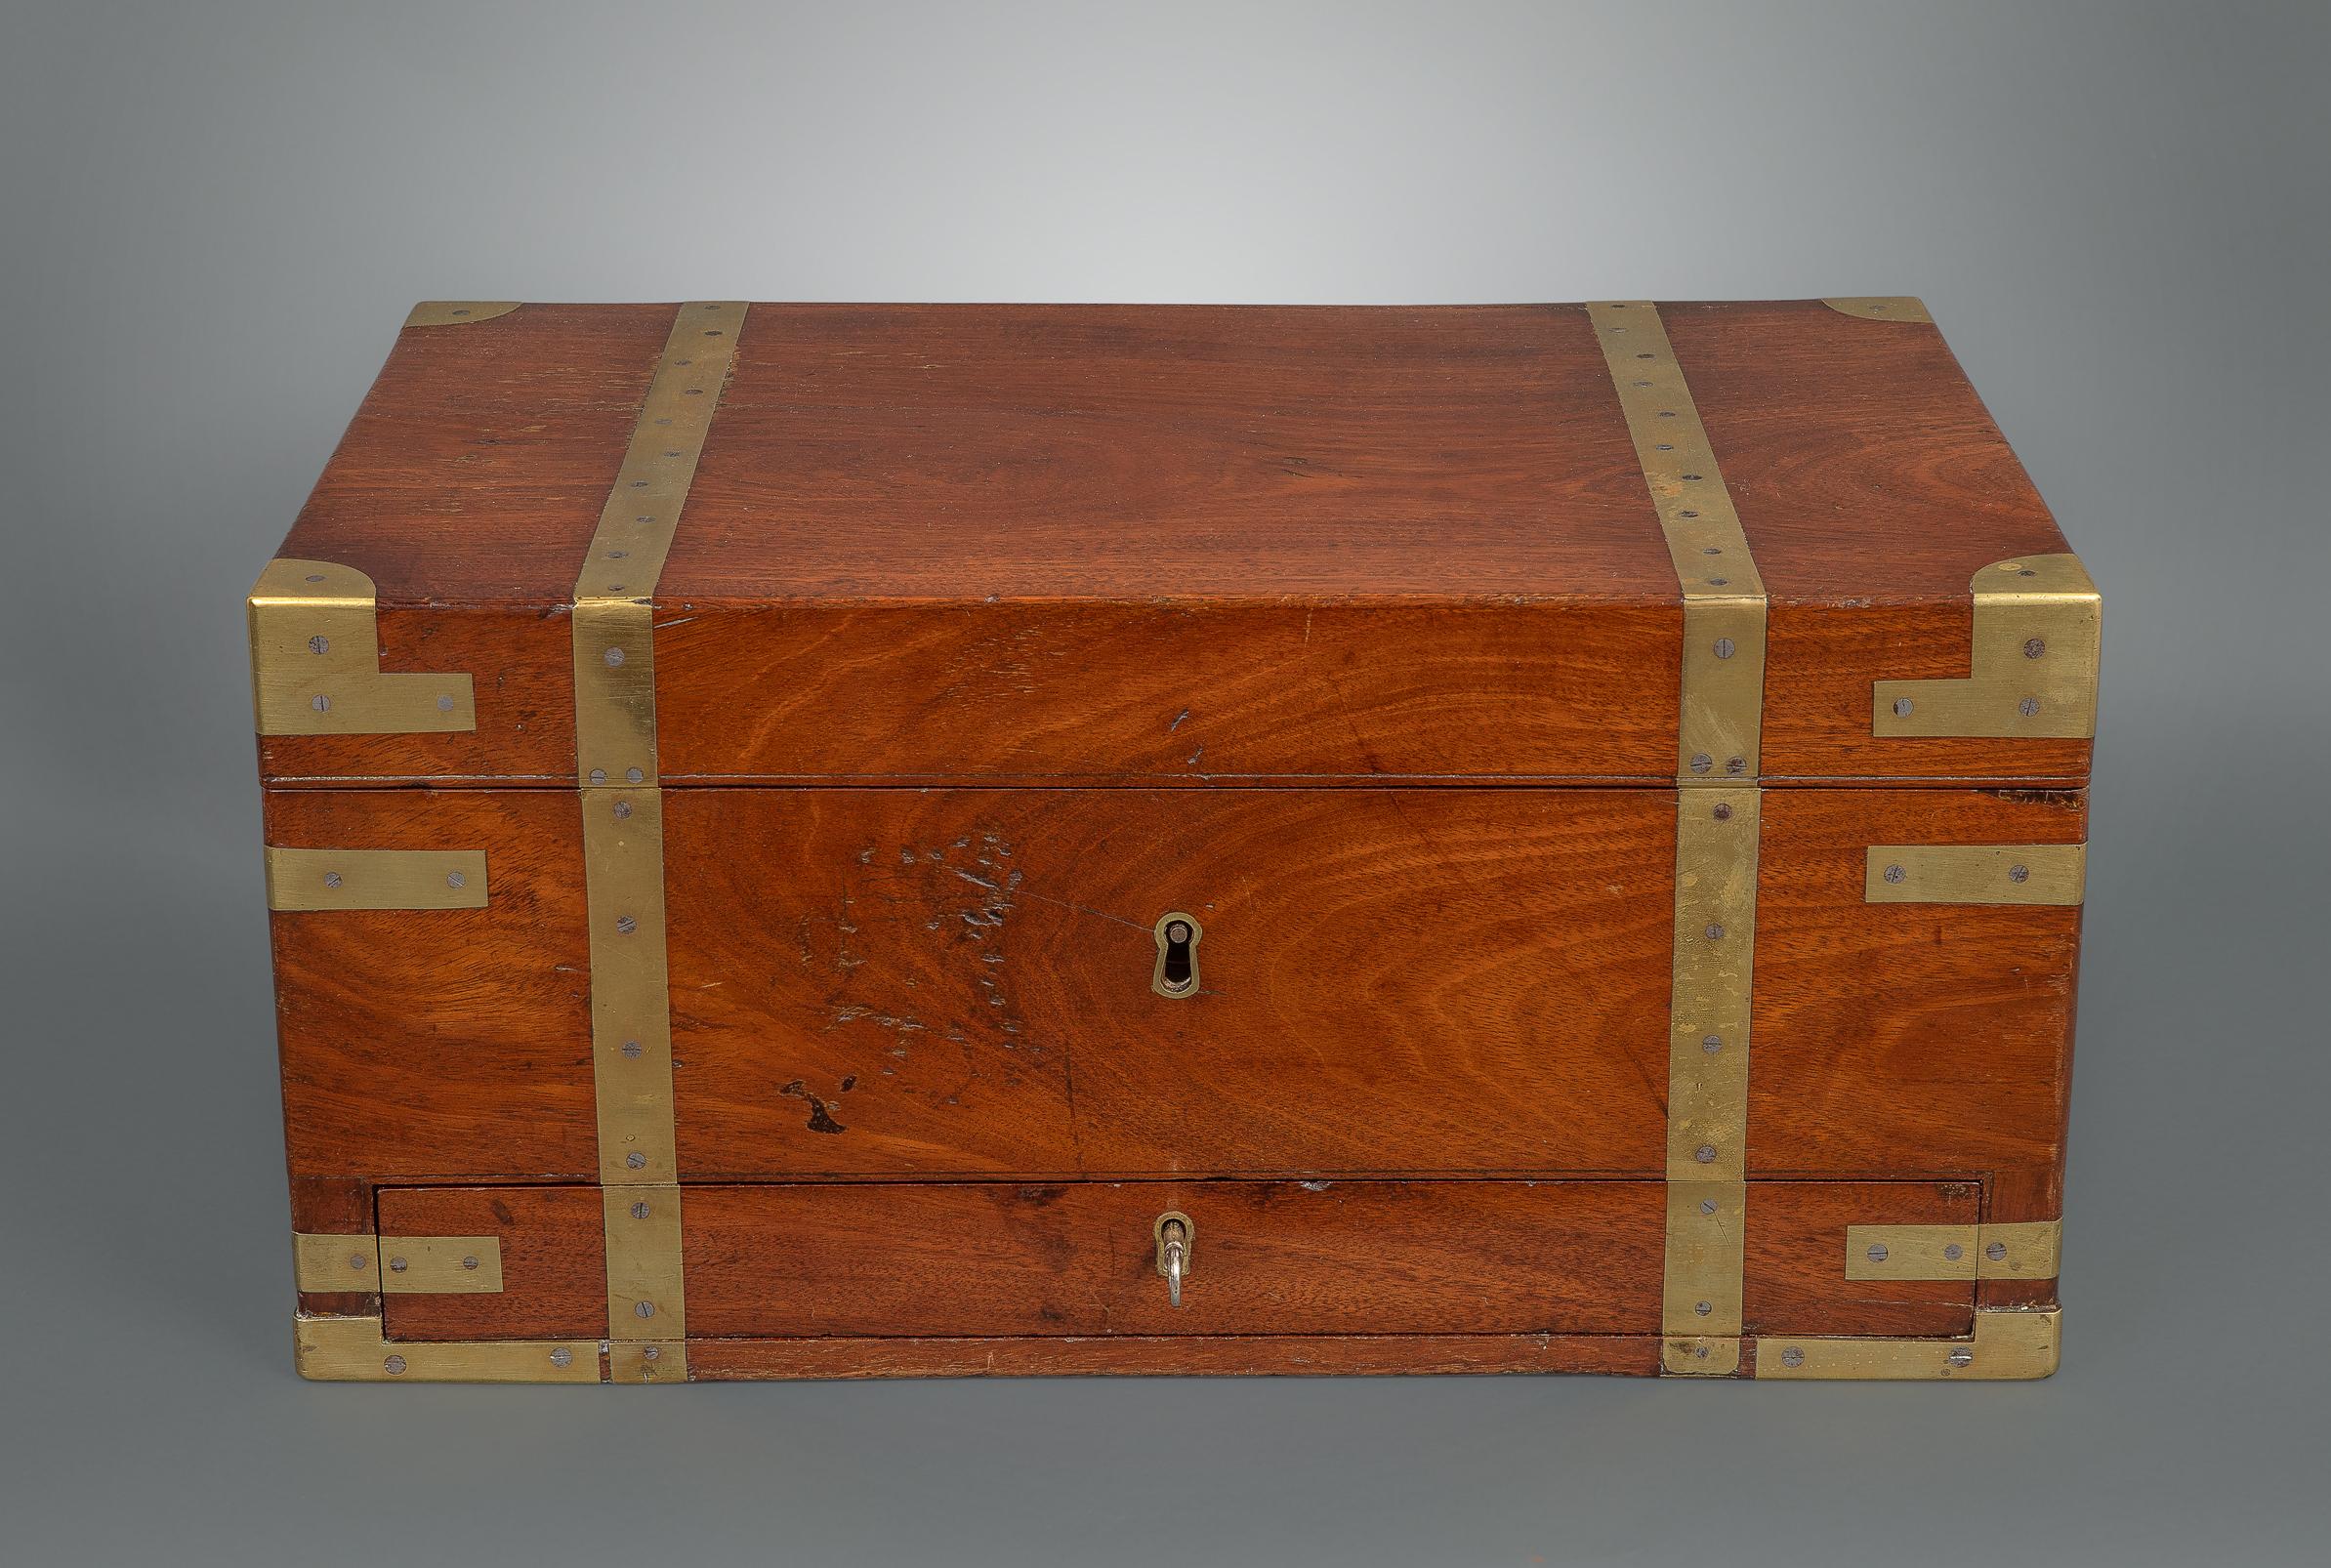 Campaign tea chests are rare, and this example which is clearly for naval use is exceptionally rare. With three foil-lined tea compartments to the main section with a drawer beneath to hold accouterments, flush mounted campaign handles to the sides